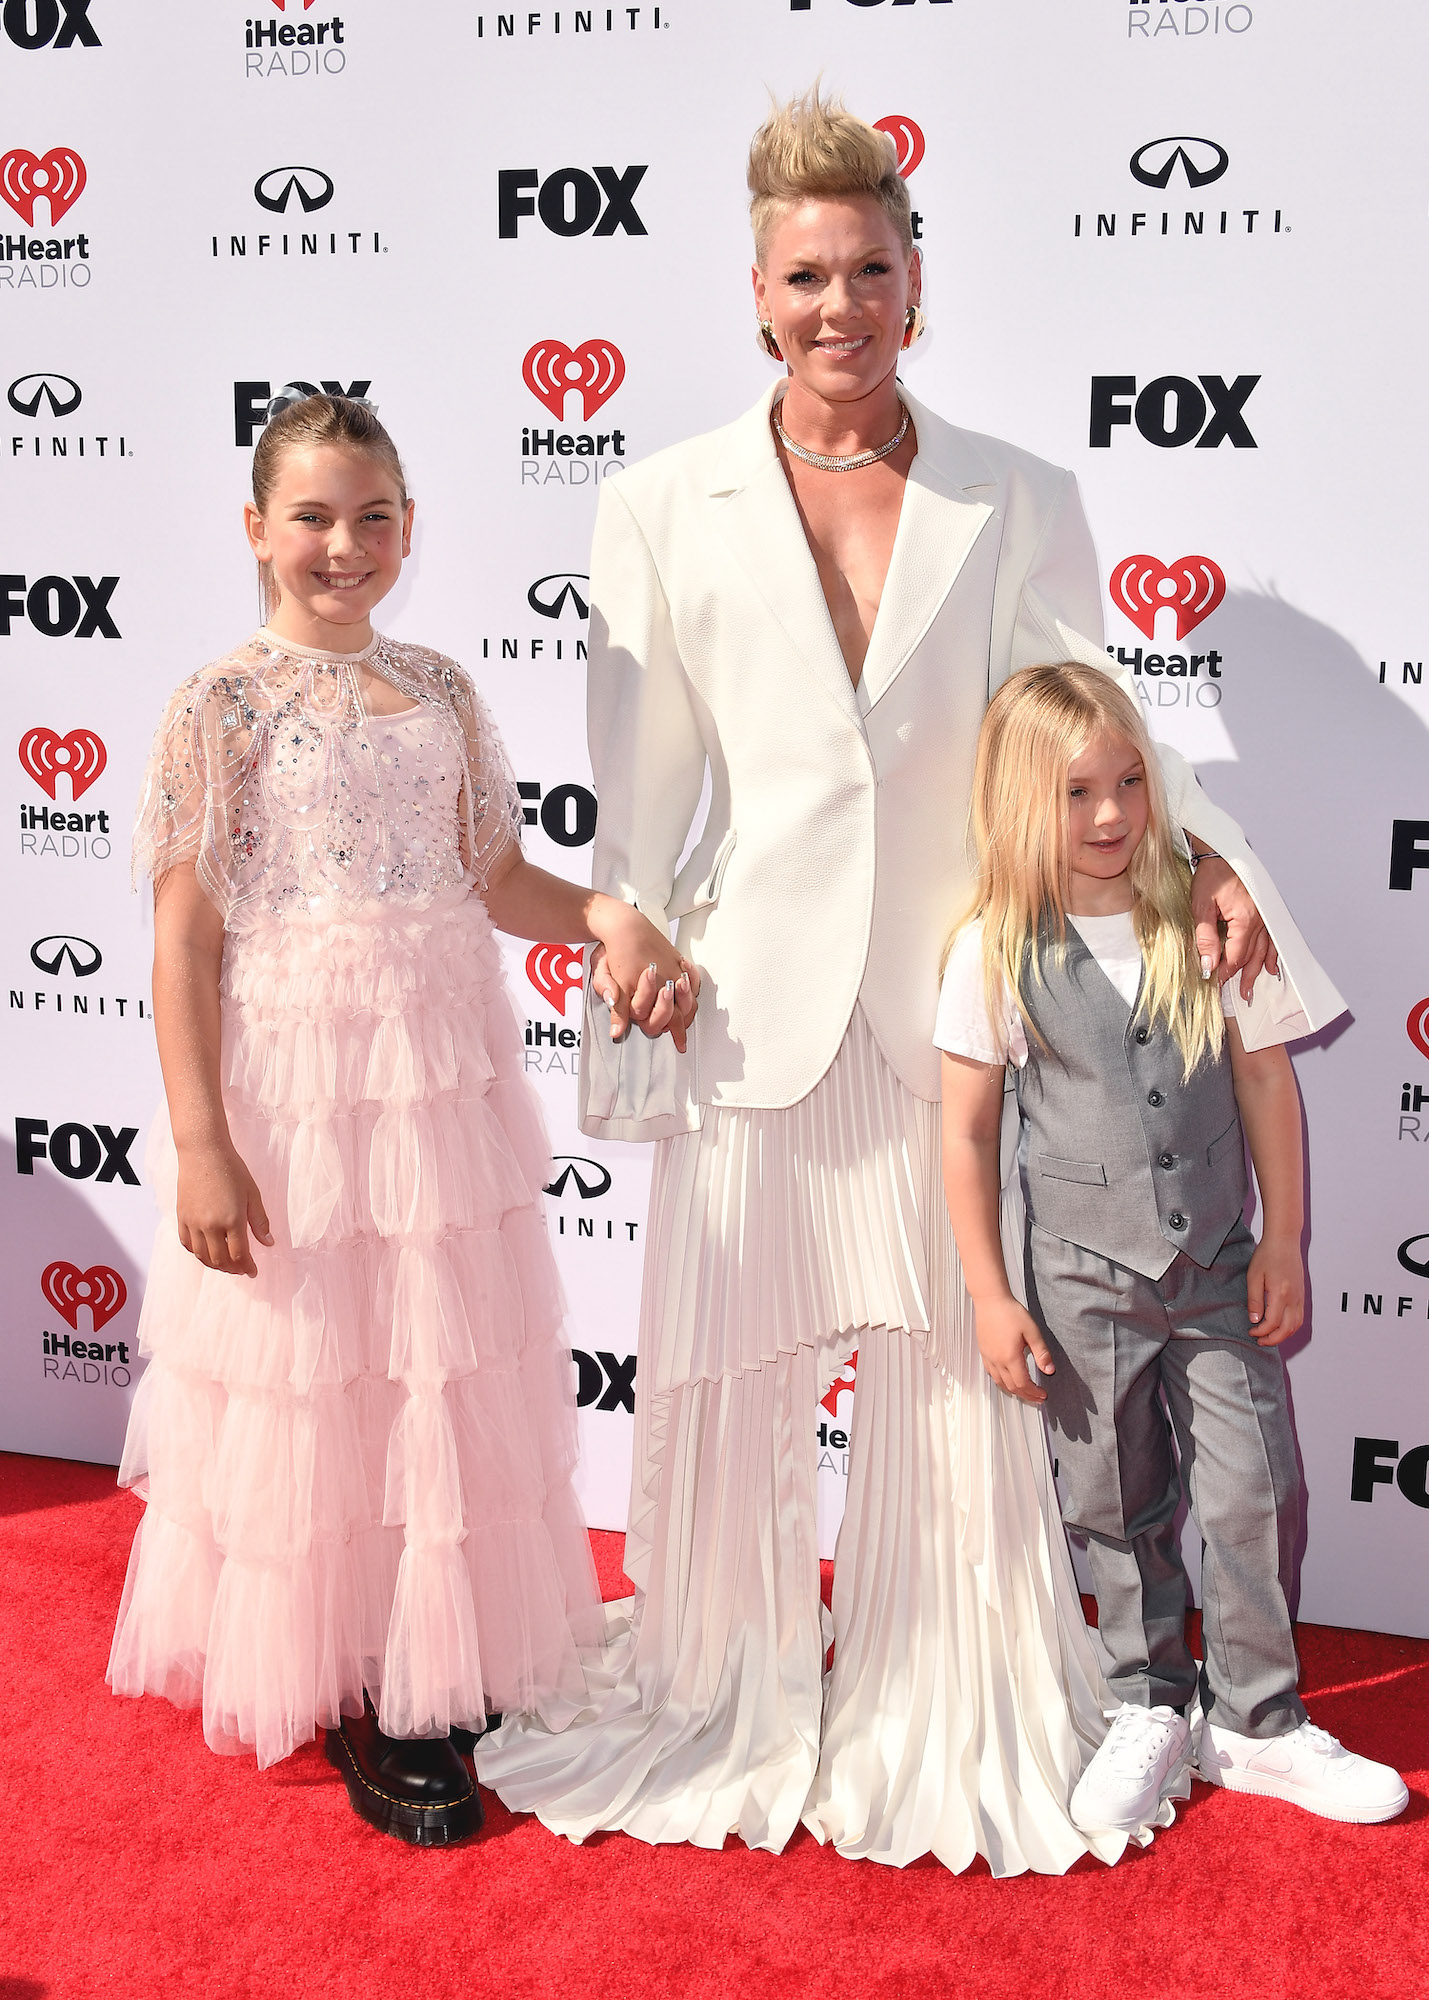 Pink and Carey Hart's Family Album: Pics With Kids